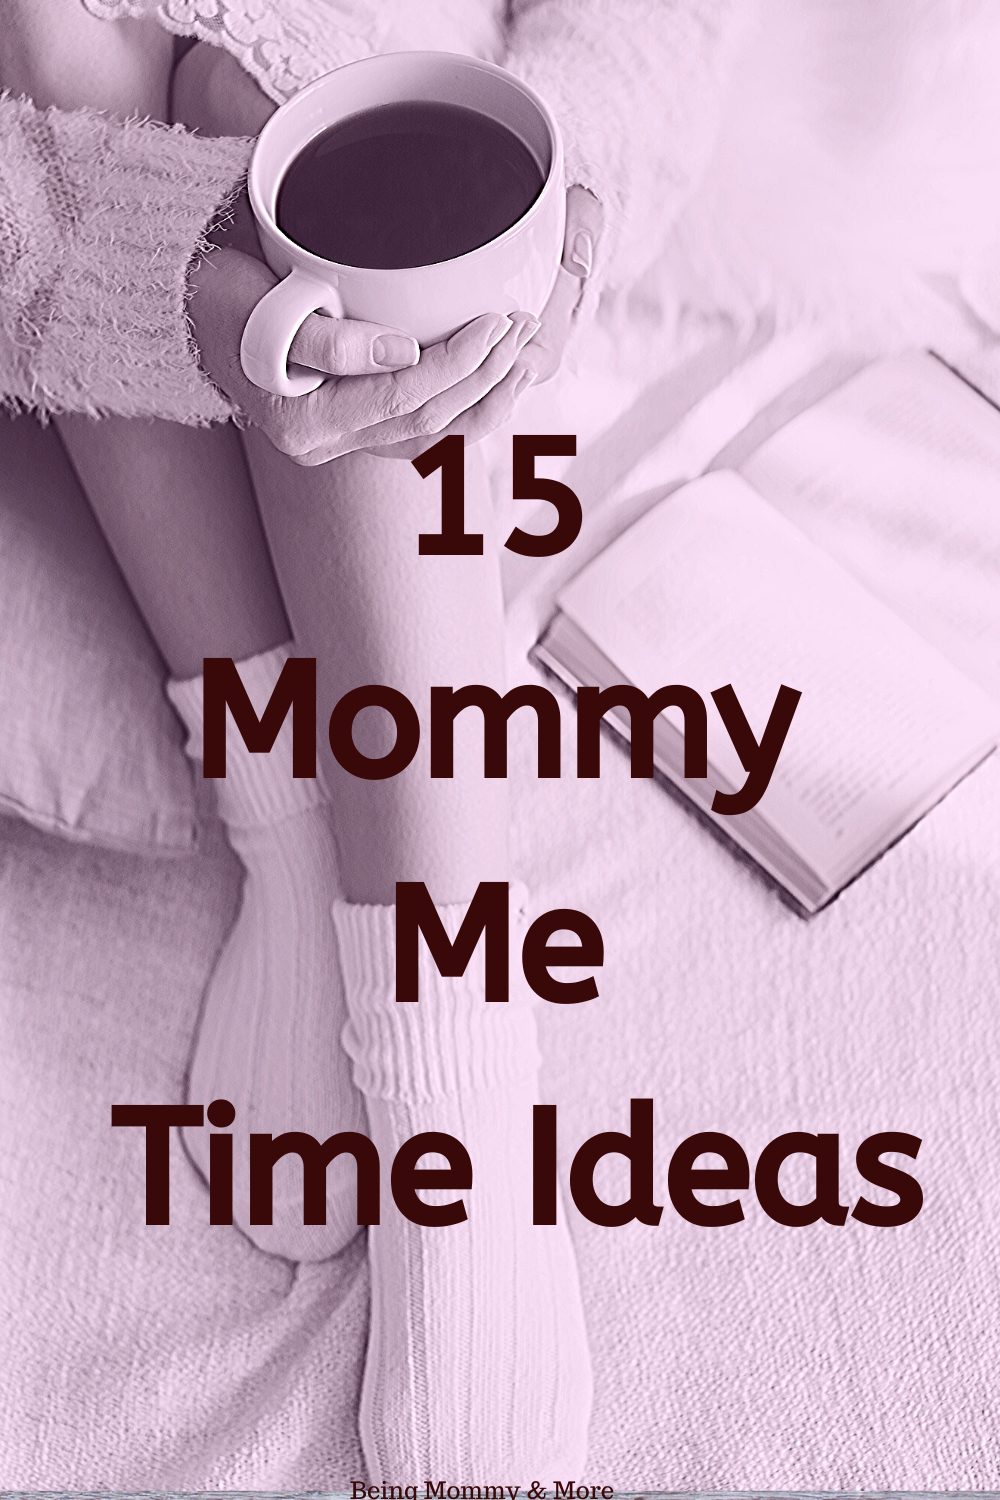 15 Ways to spend mommy me time